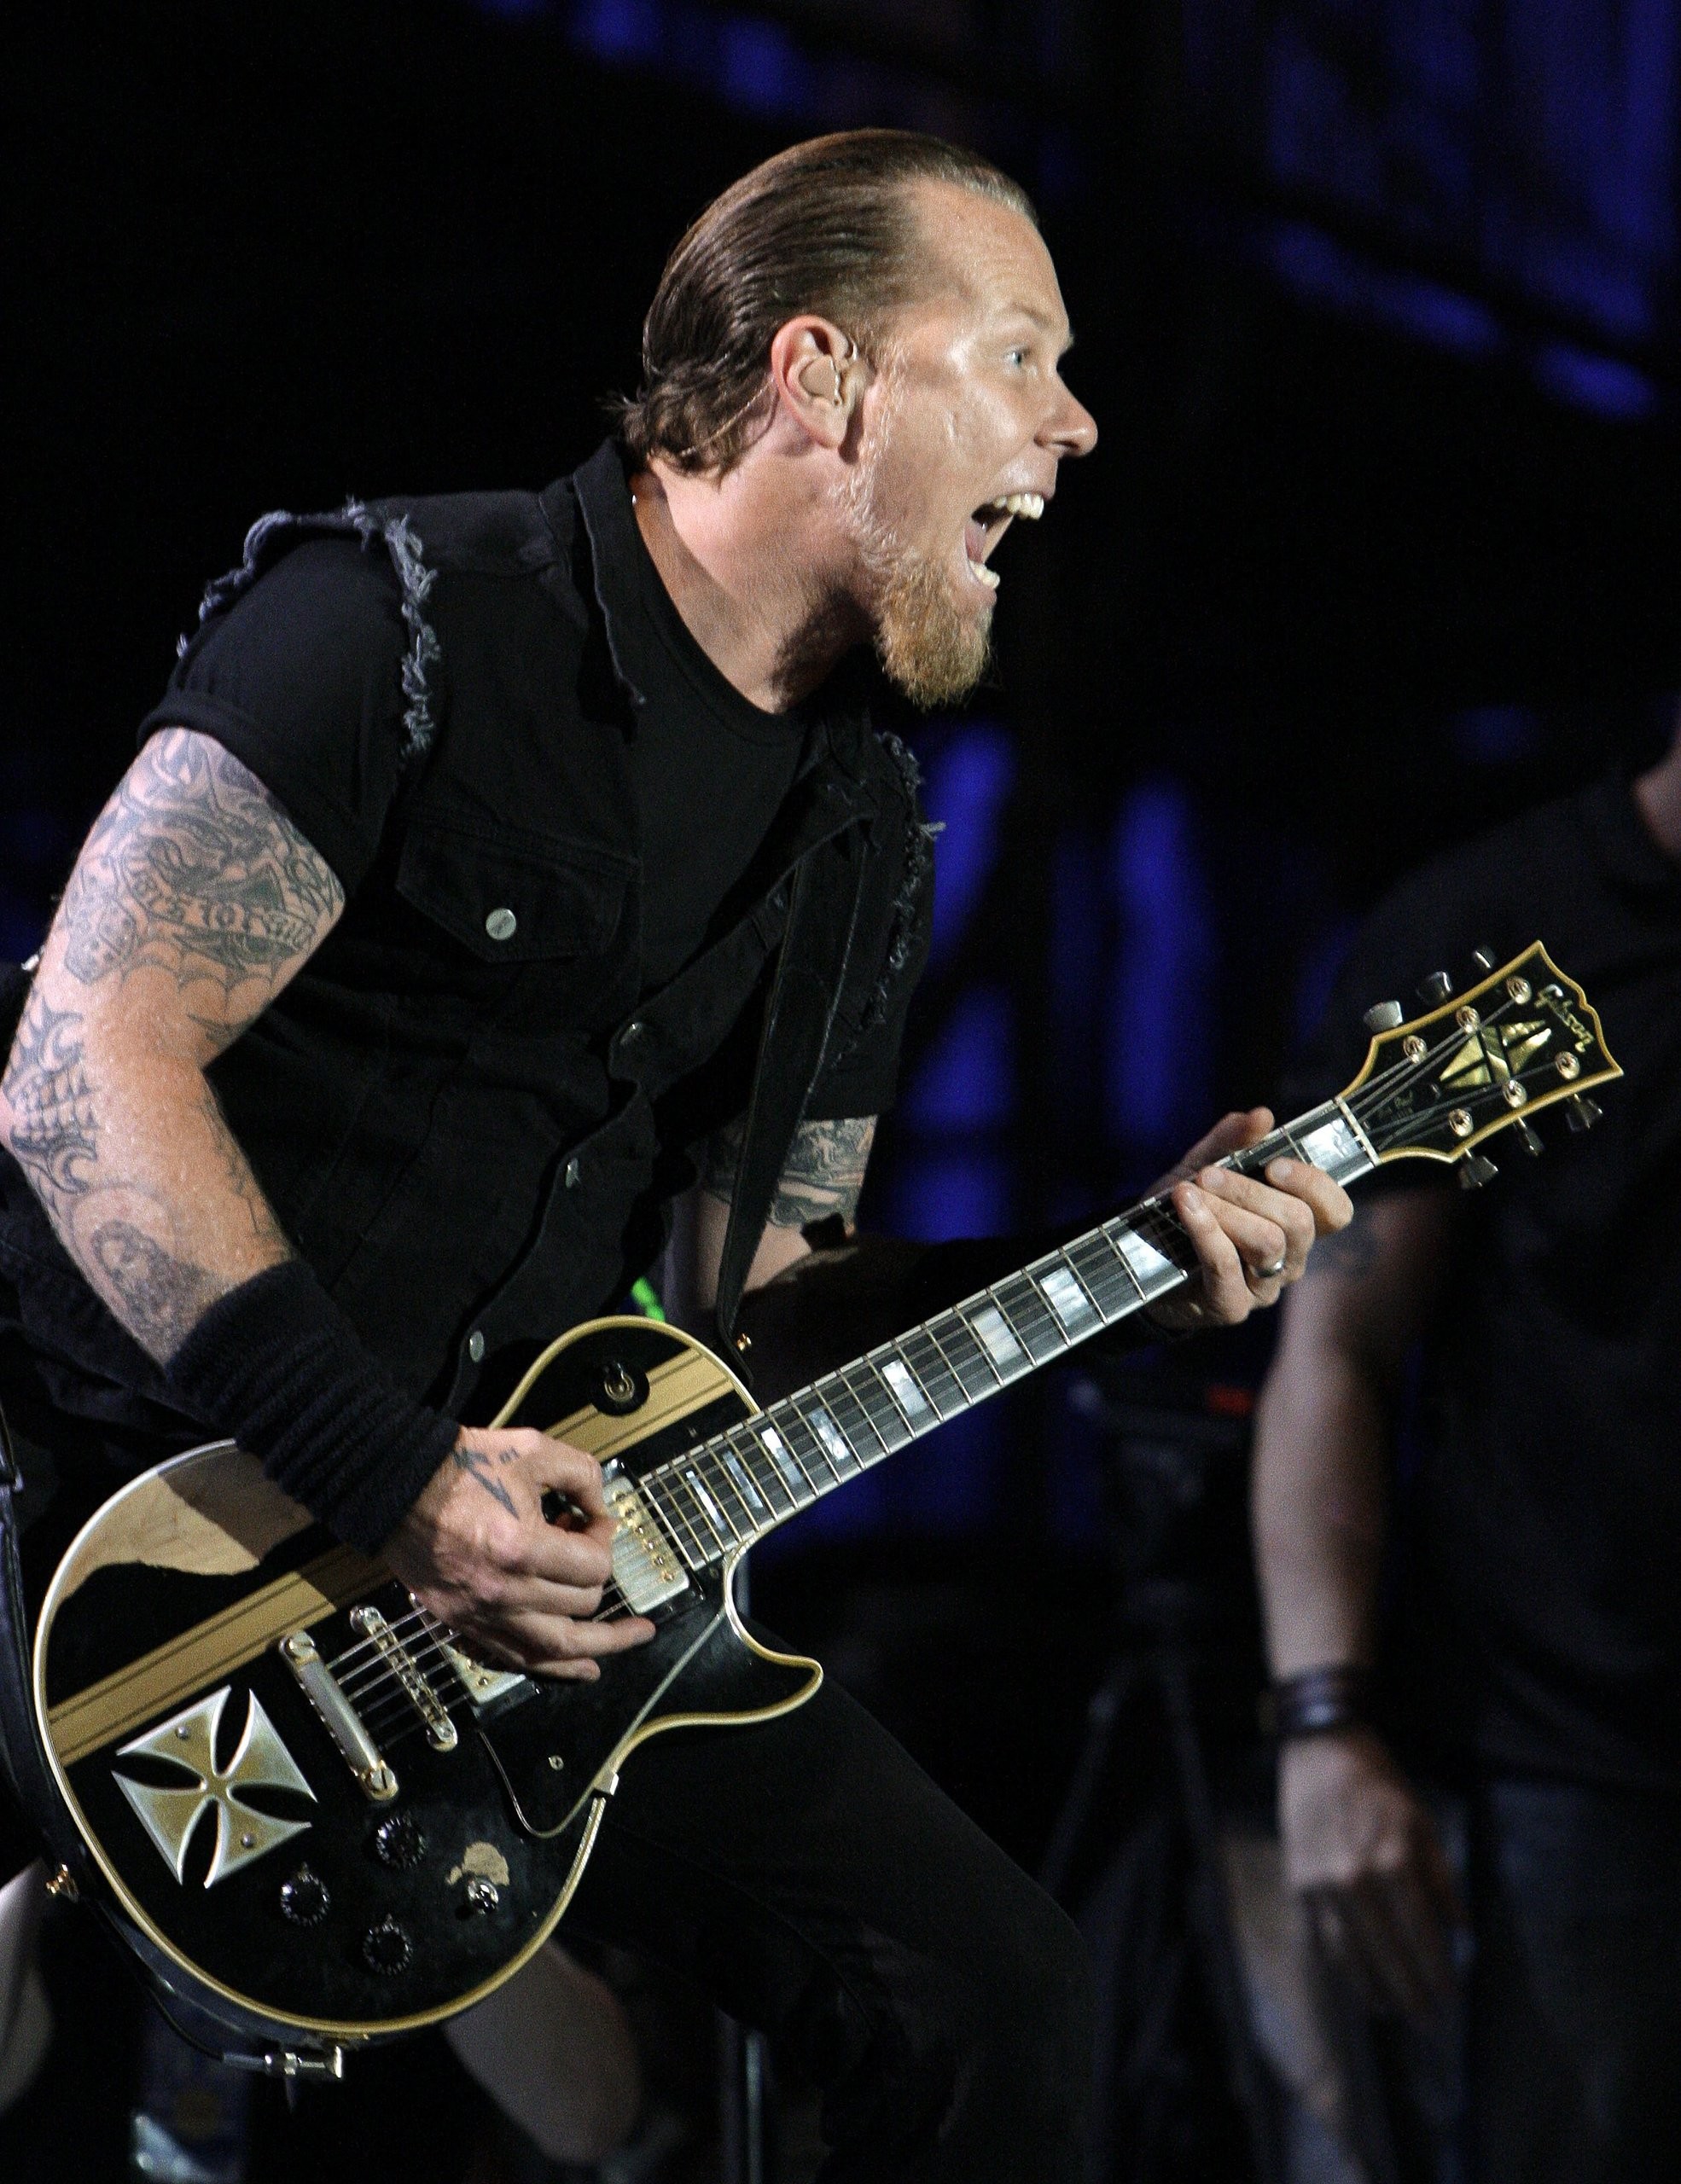 James Hetfield From Metallica With His Gibson Iron Cross Signature Guitar I Want That Guitar So Bad 1970x2560